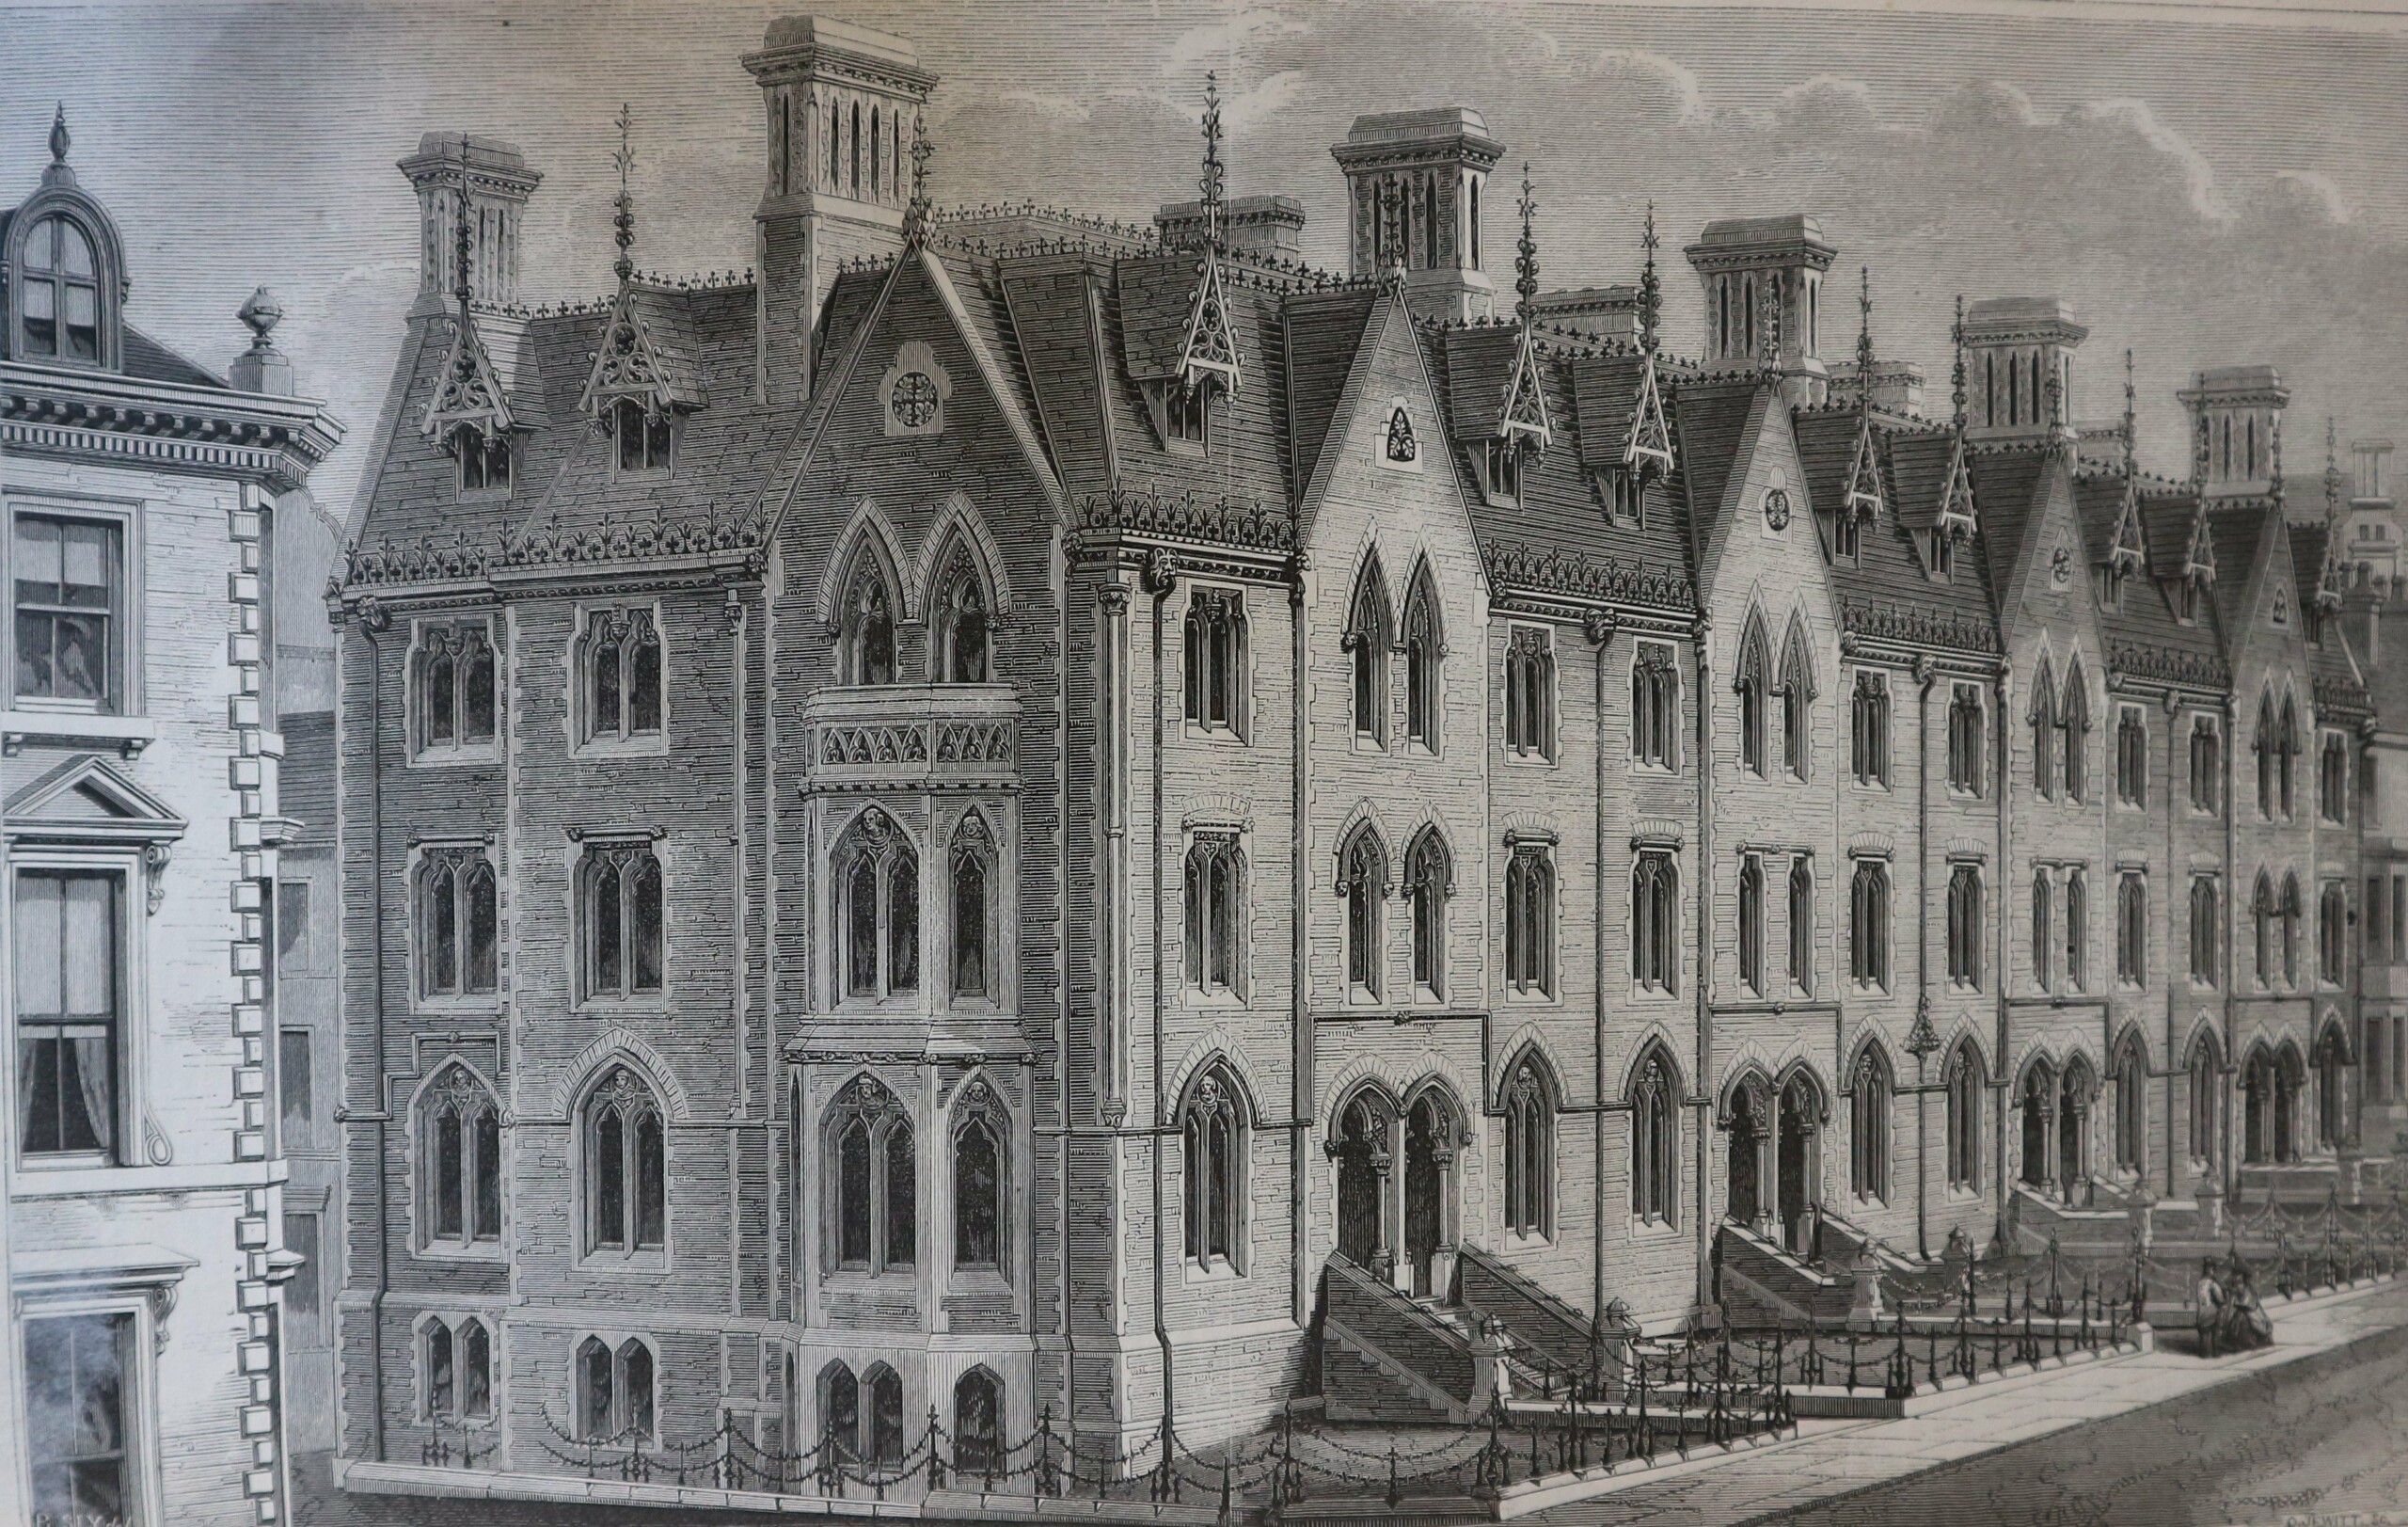 2.13 Illustration of Terrace Royal shortly after its completion, 1863 (The Builder).